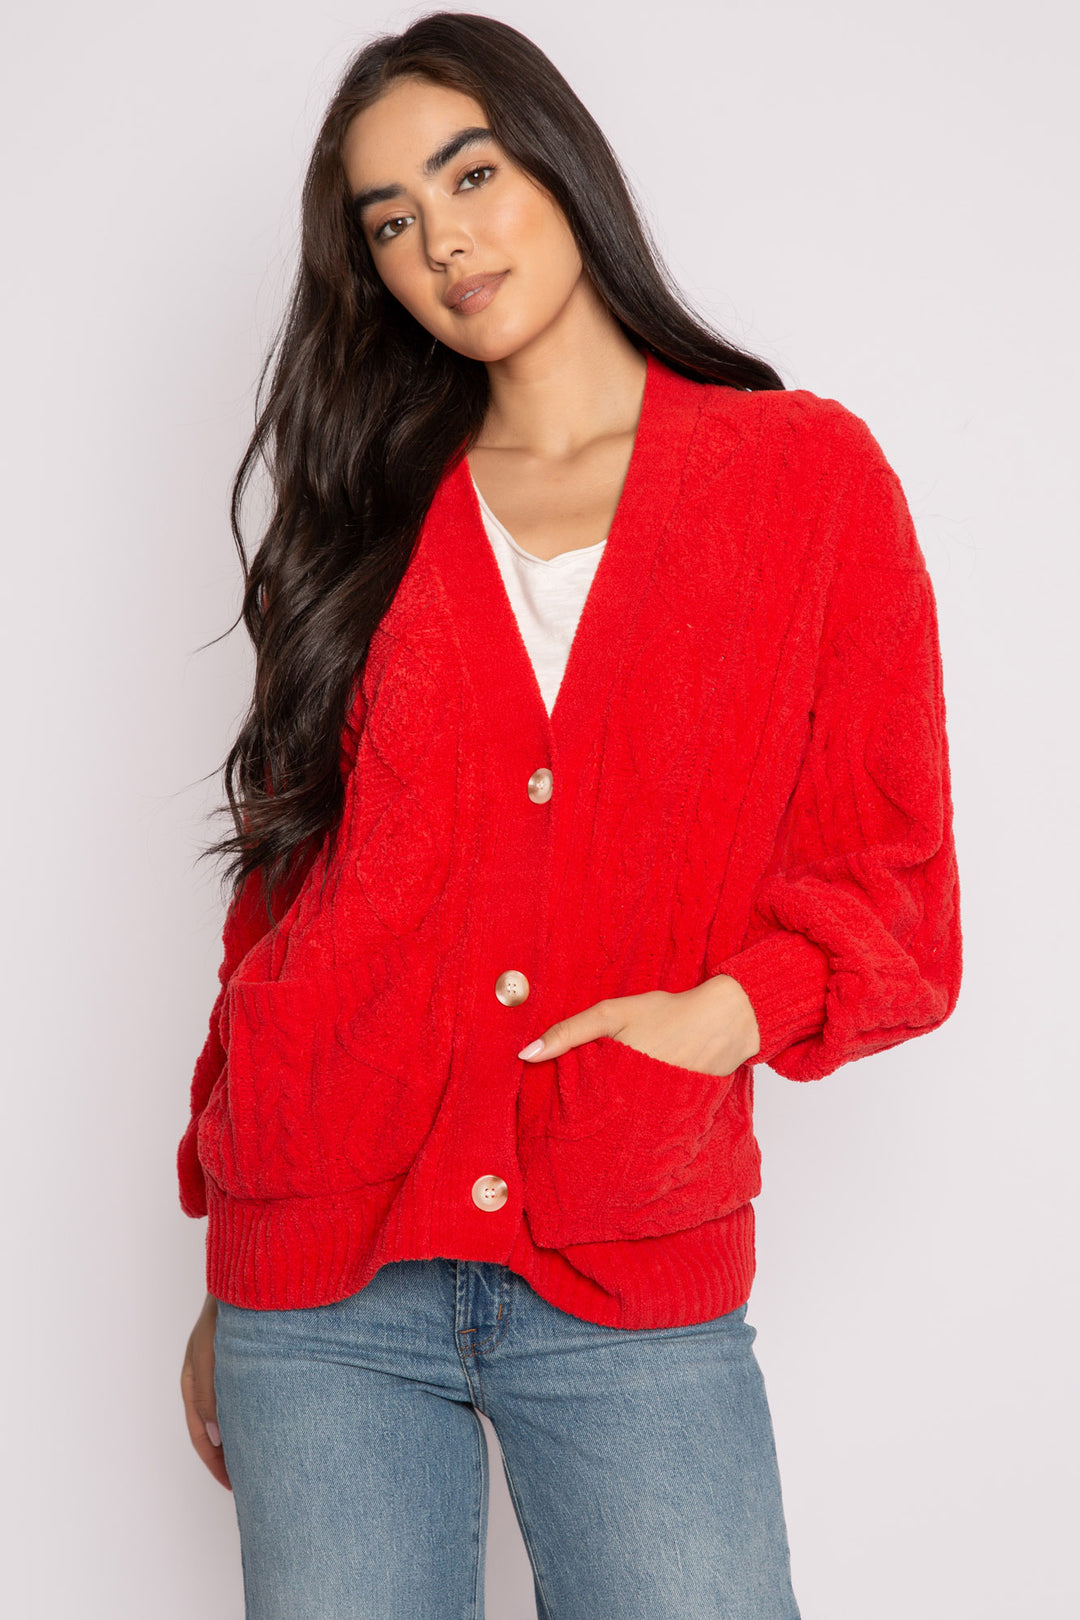 Cardigan sweater in red chenille knit cable pattern. Two lower front pockets & 3-button closure. (7257677987940)